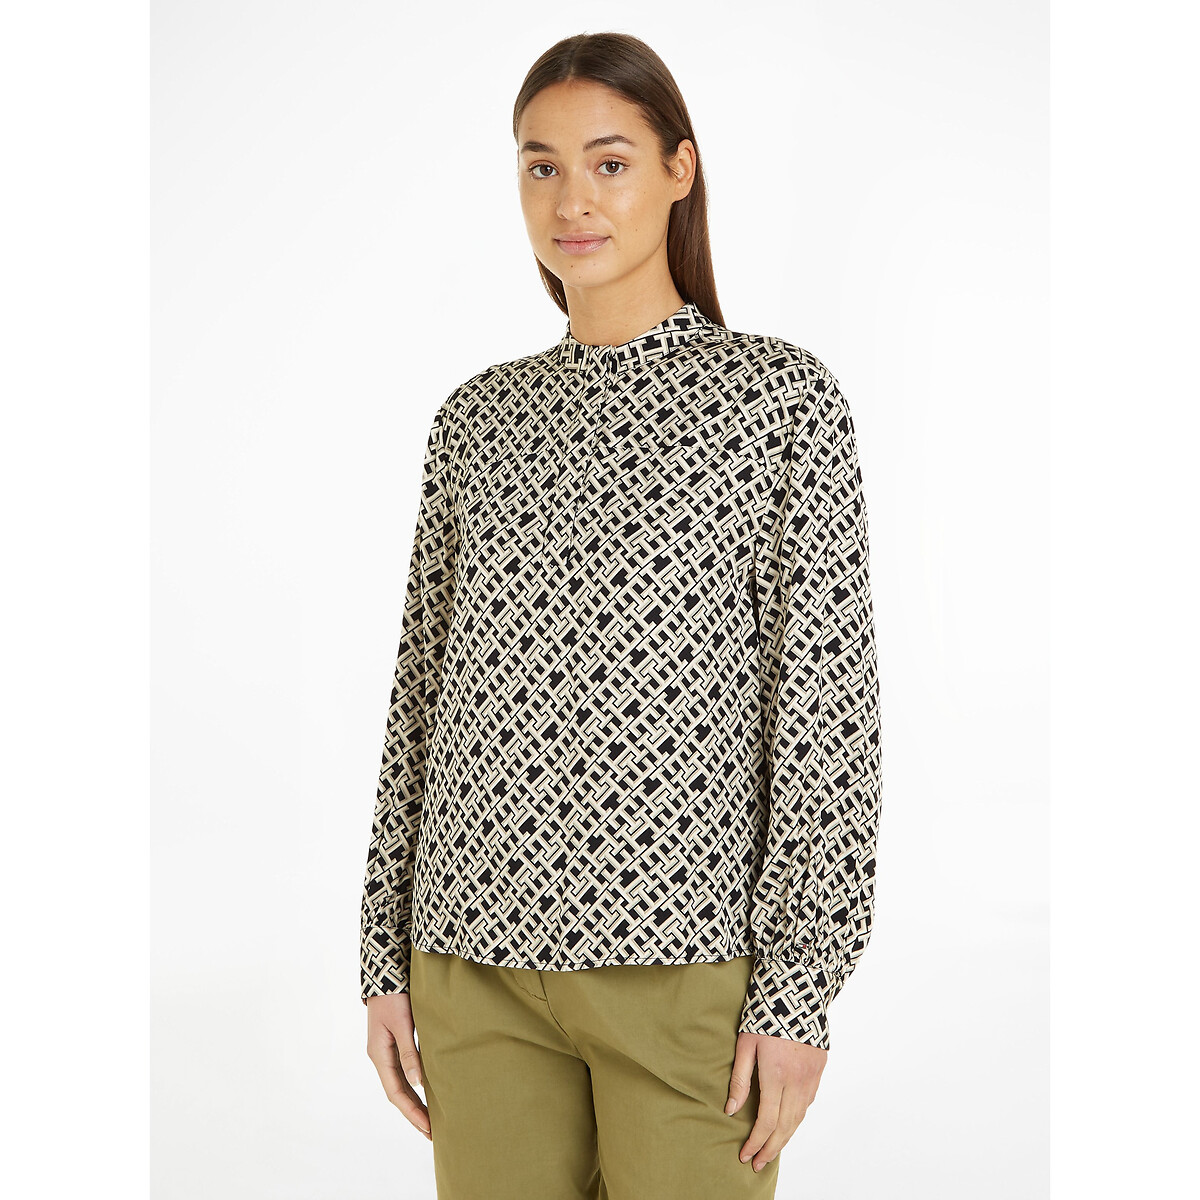 Monogram Print Blouse with Long Sleeves